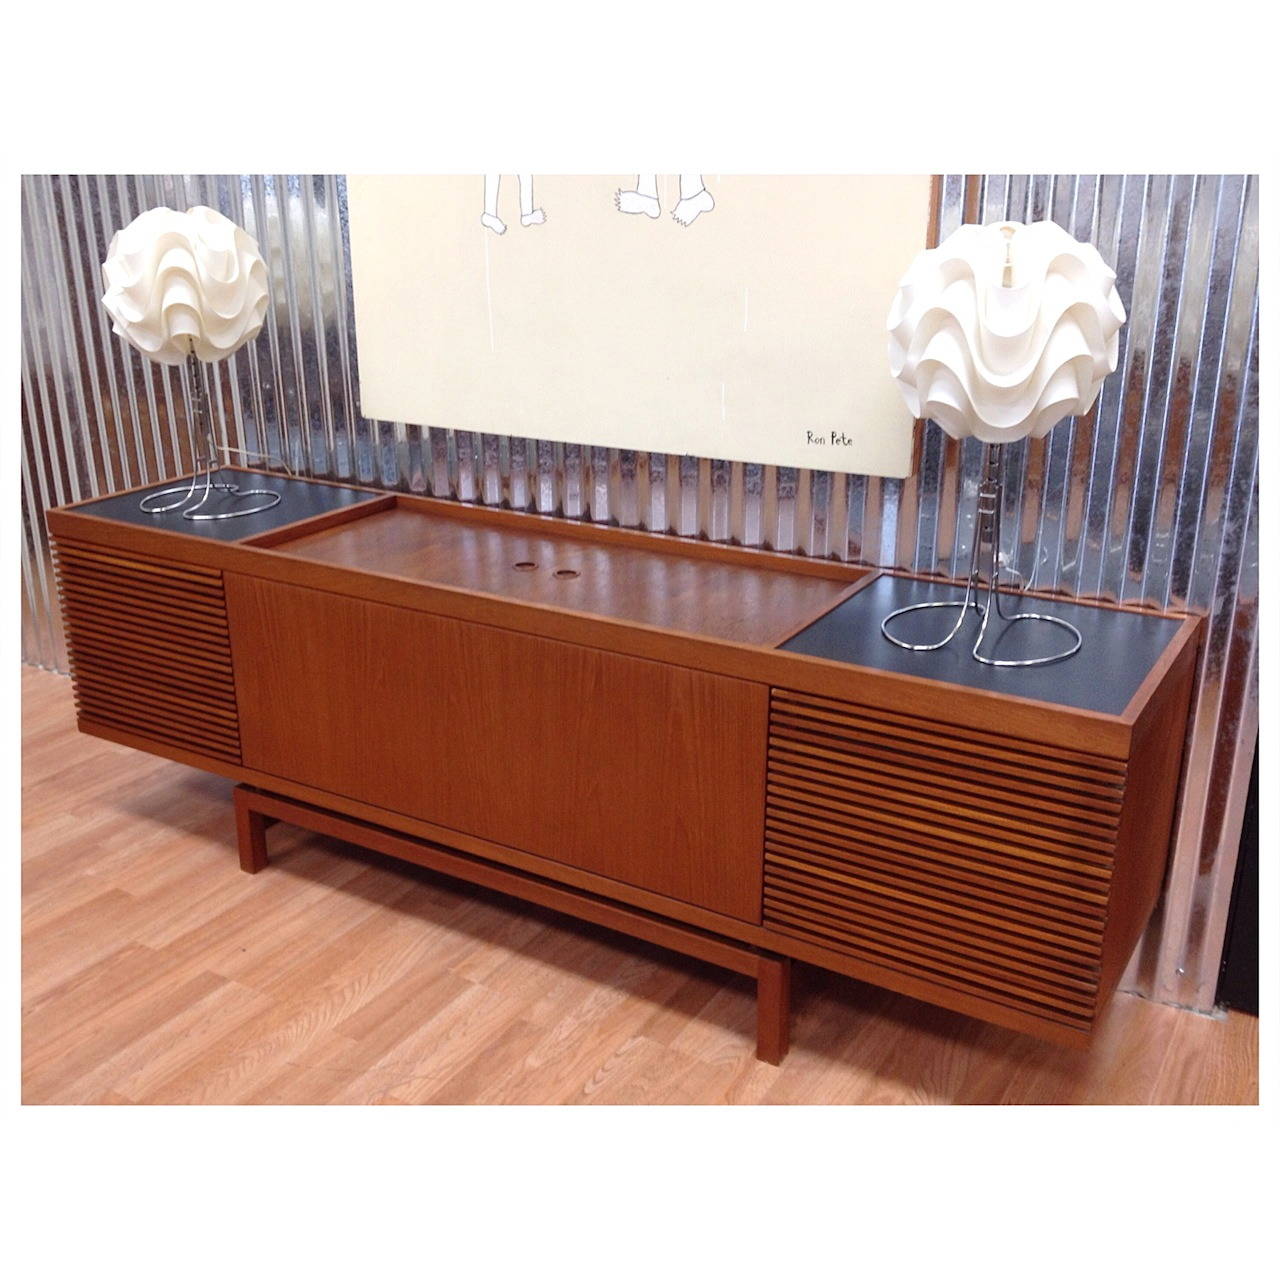 Vintage Danish modern teak stereo media cabinet credenza made in Denmark. Great looking cabinet with removable slatted teak speaker grills. Two sliding doors on top reveal a spacious storage area for your components with an adjustable shelf with